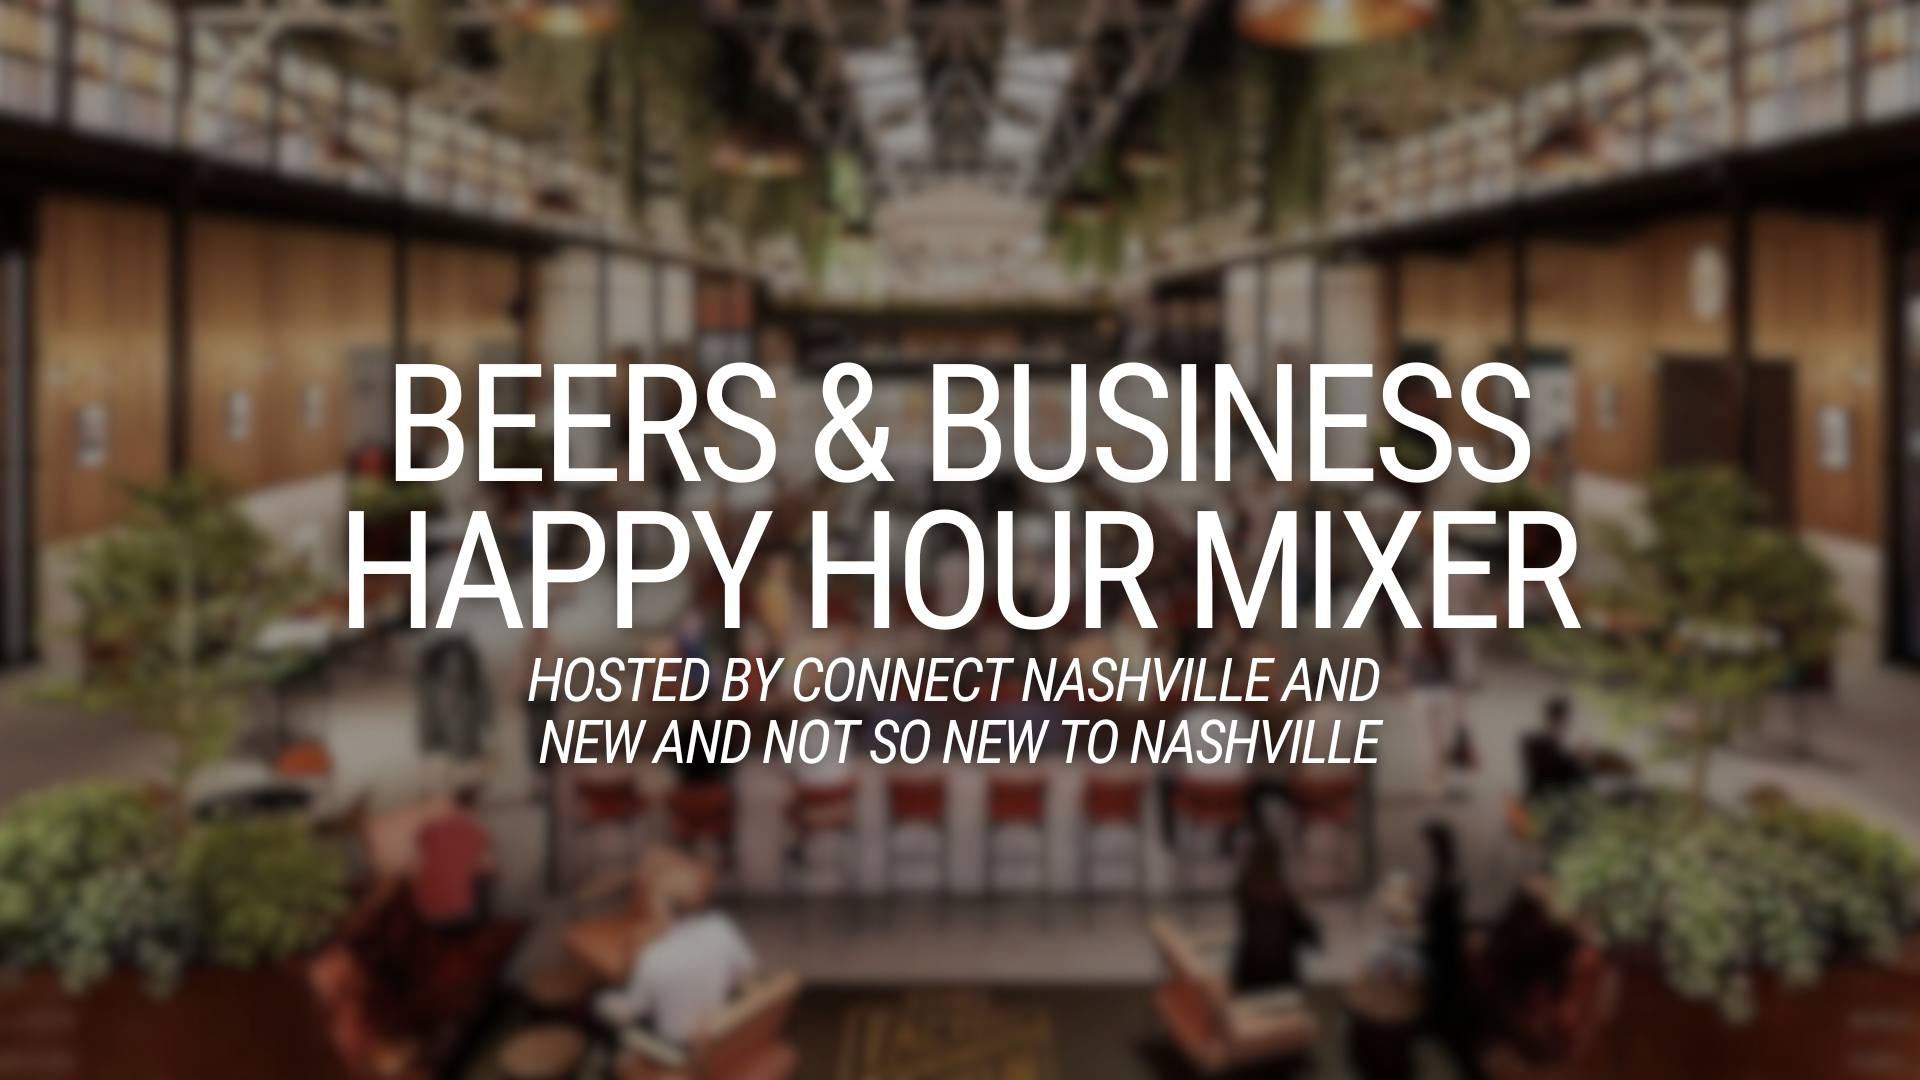 Happy Hour Mixer at The Skylight Bar in The Factory at Franklin.